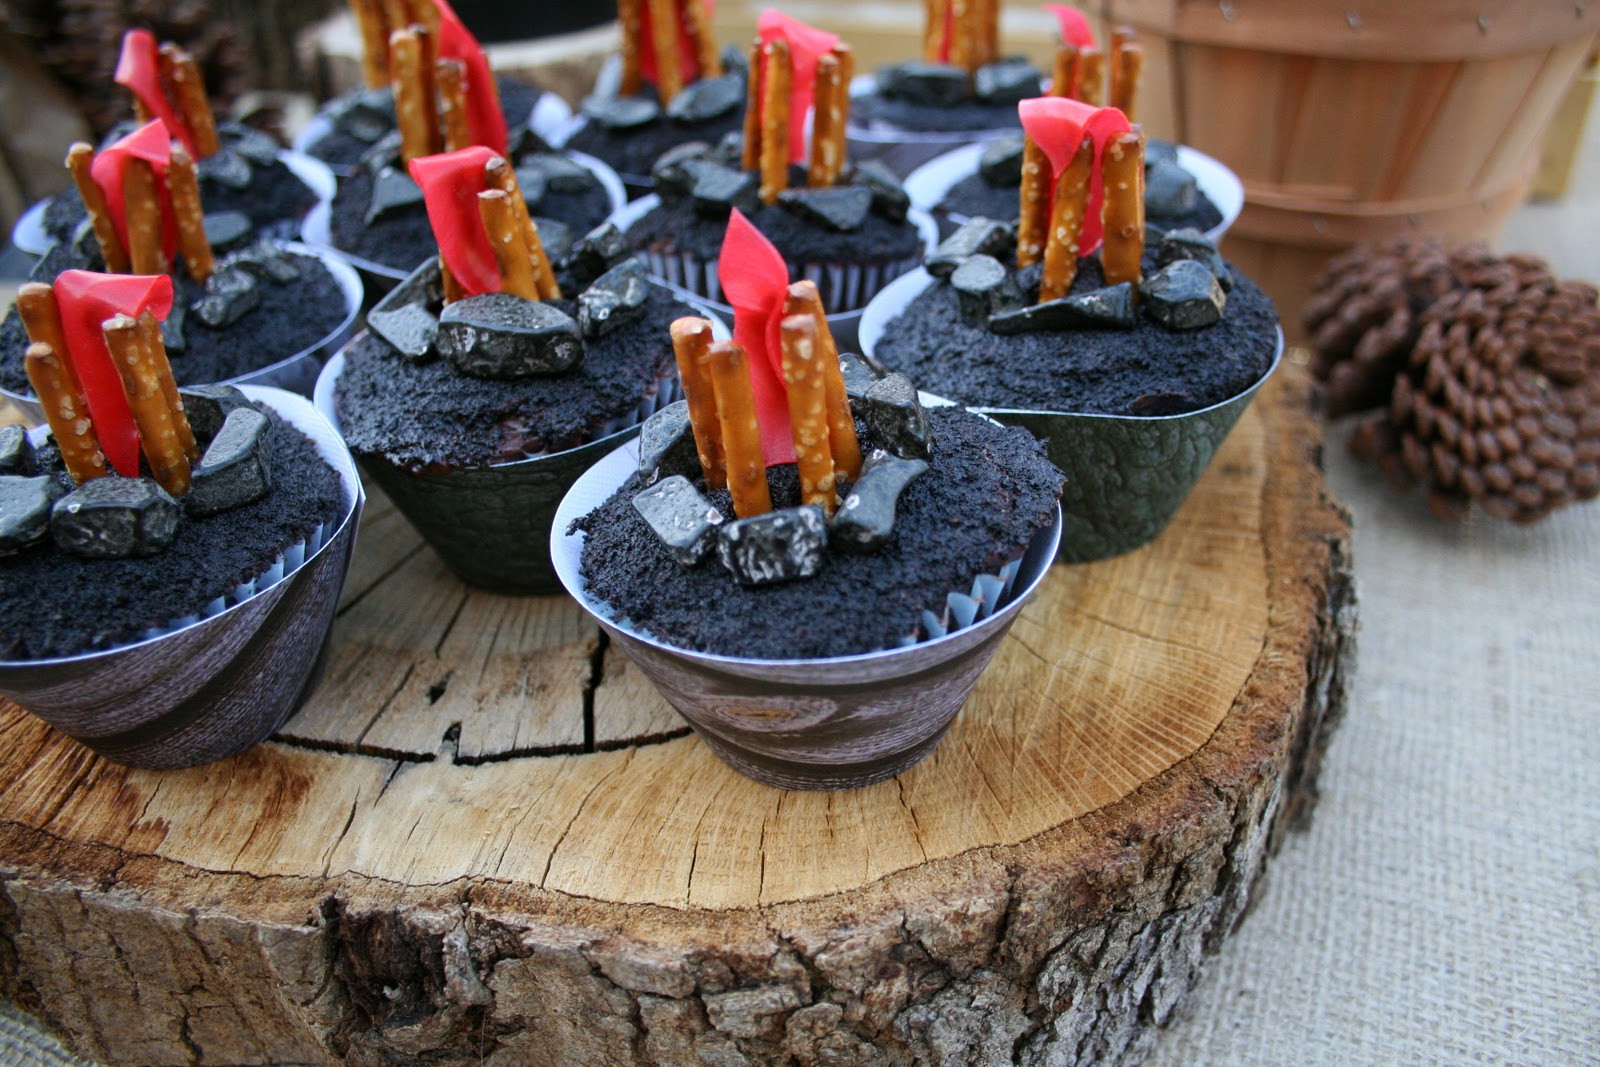 Backyard Campout Birthday Party Ideas
 Backyard Campout Party Dukes and Duchesses